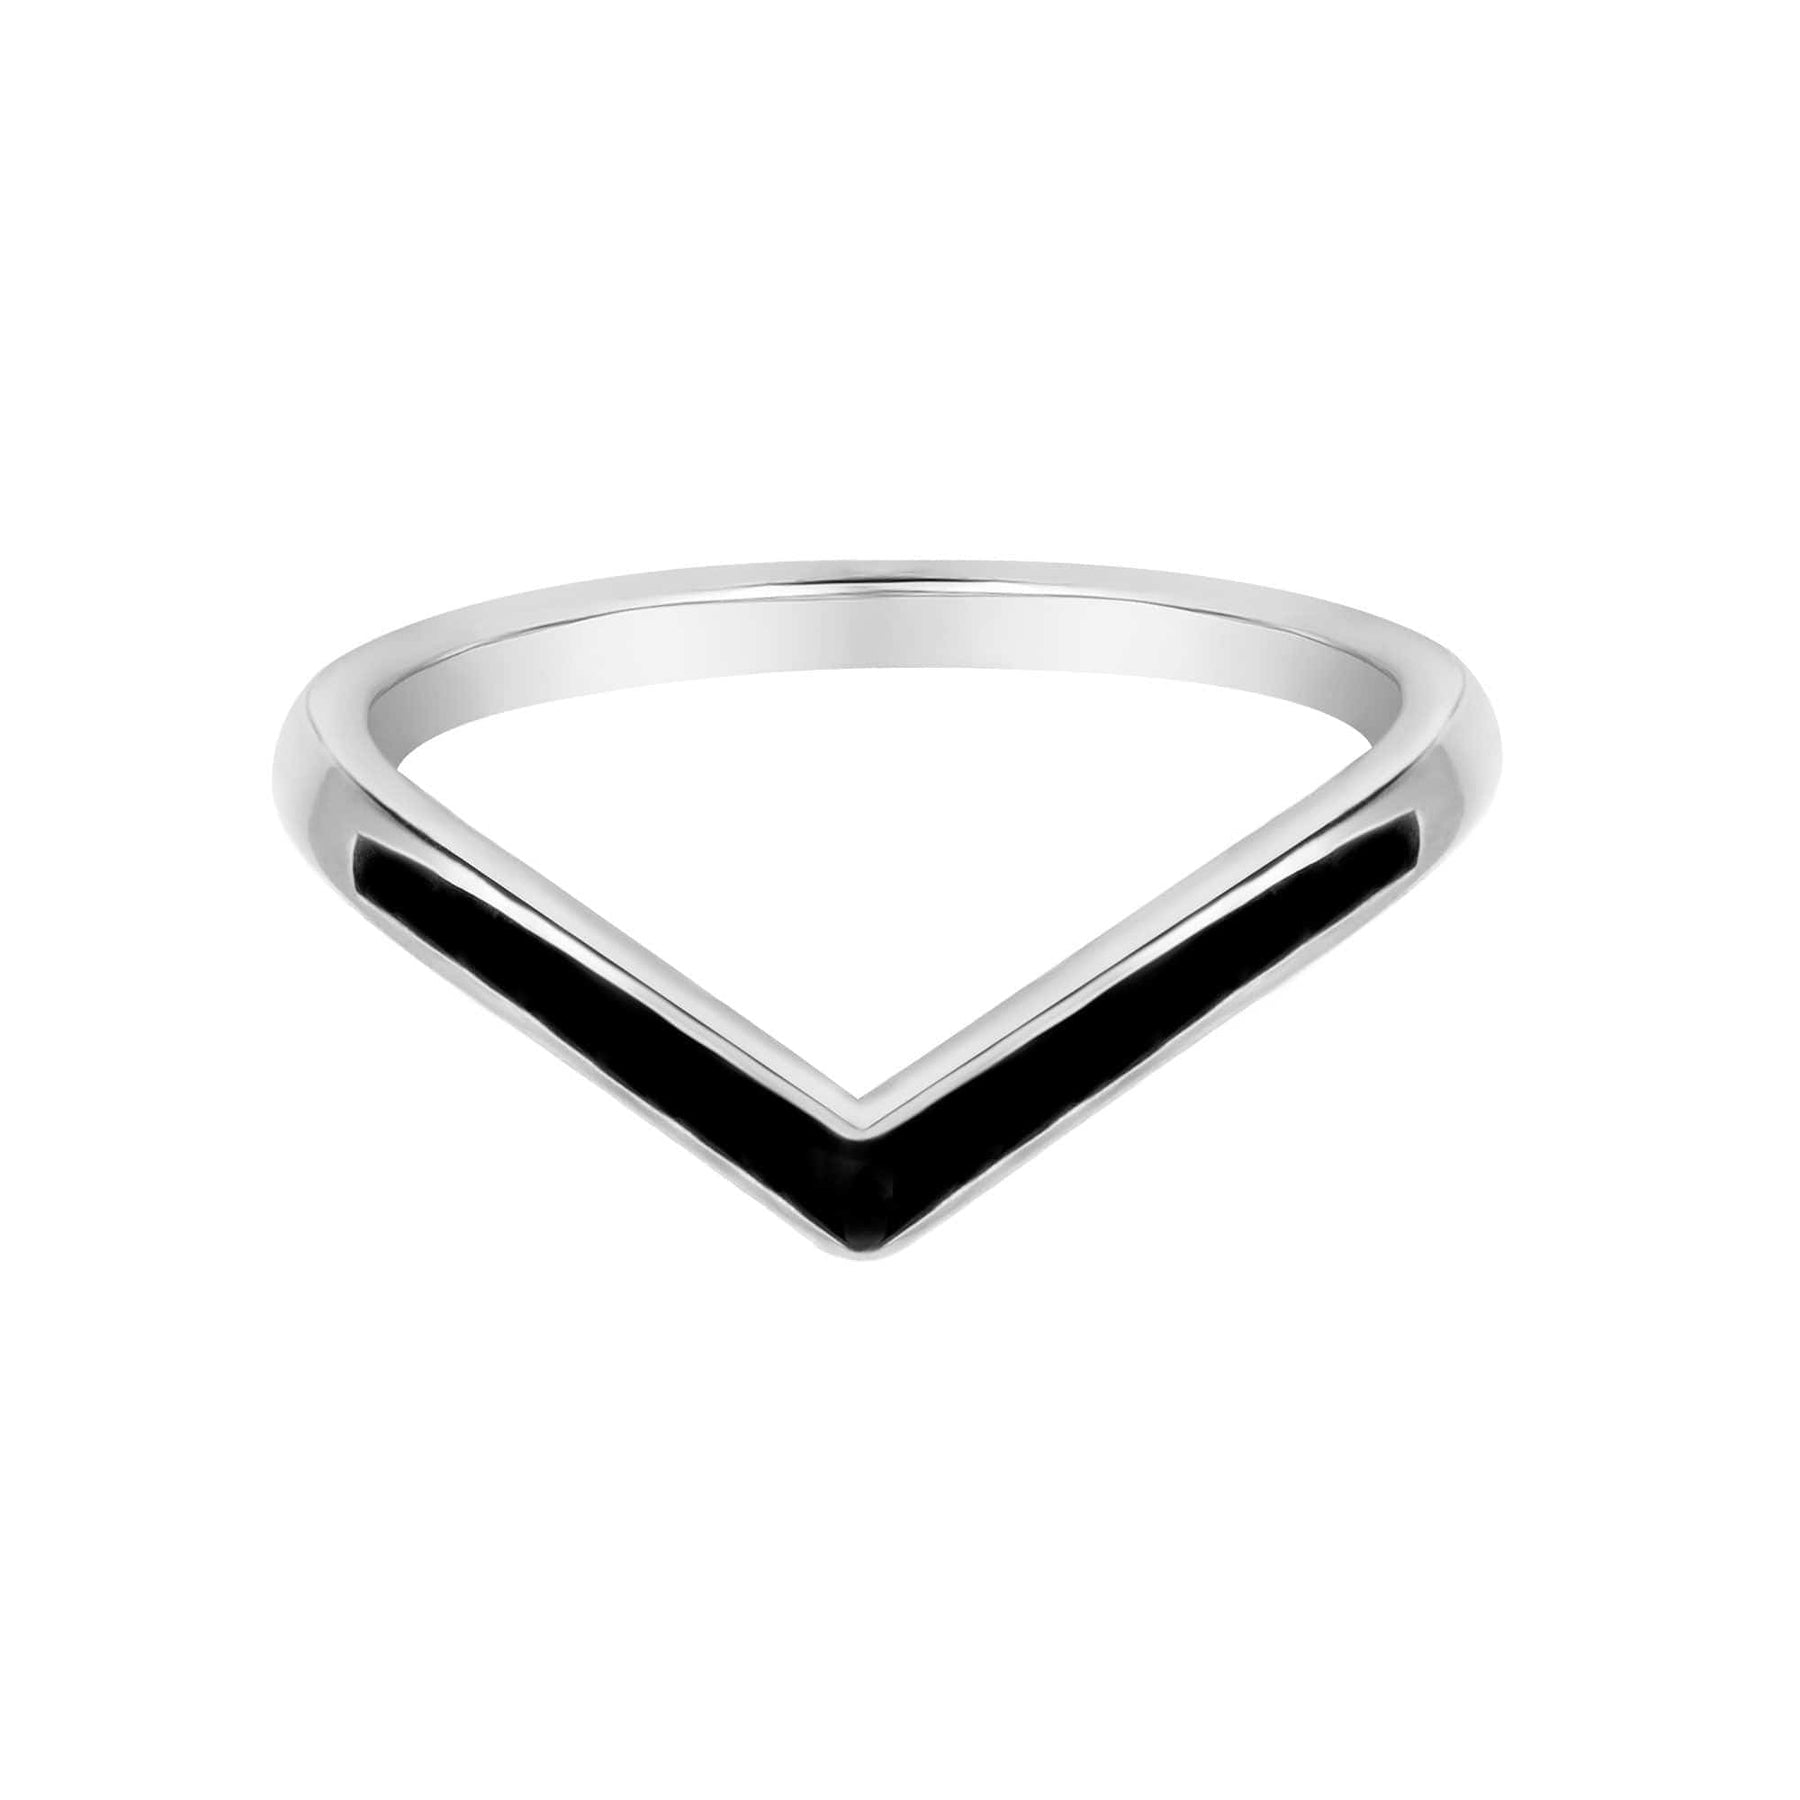 BohoMoon Stainless Steel Vivian Ring Silver / US 6 / UK L / EUR 51 (small)